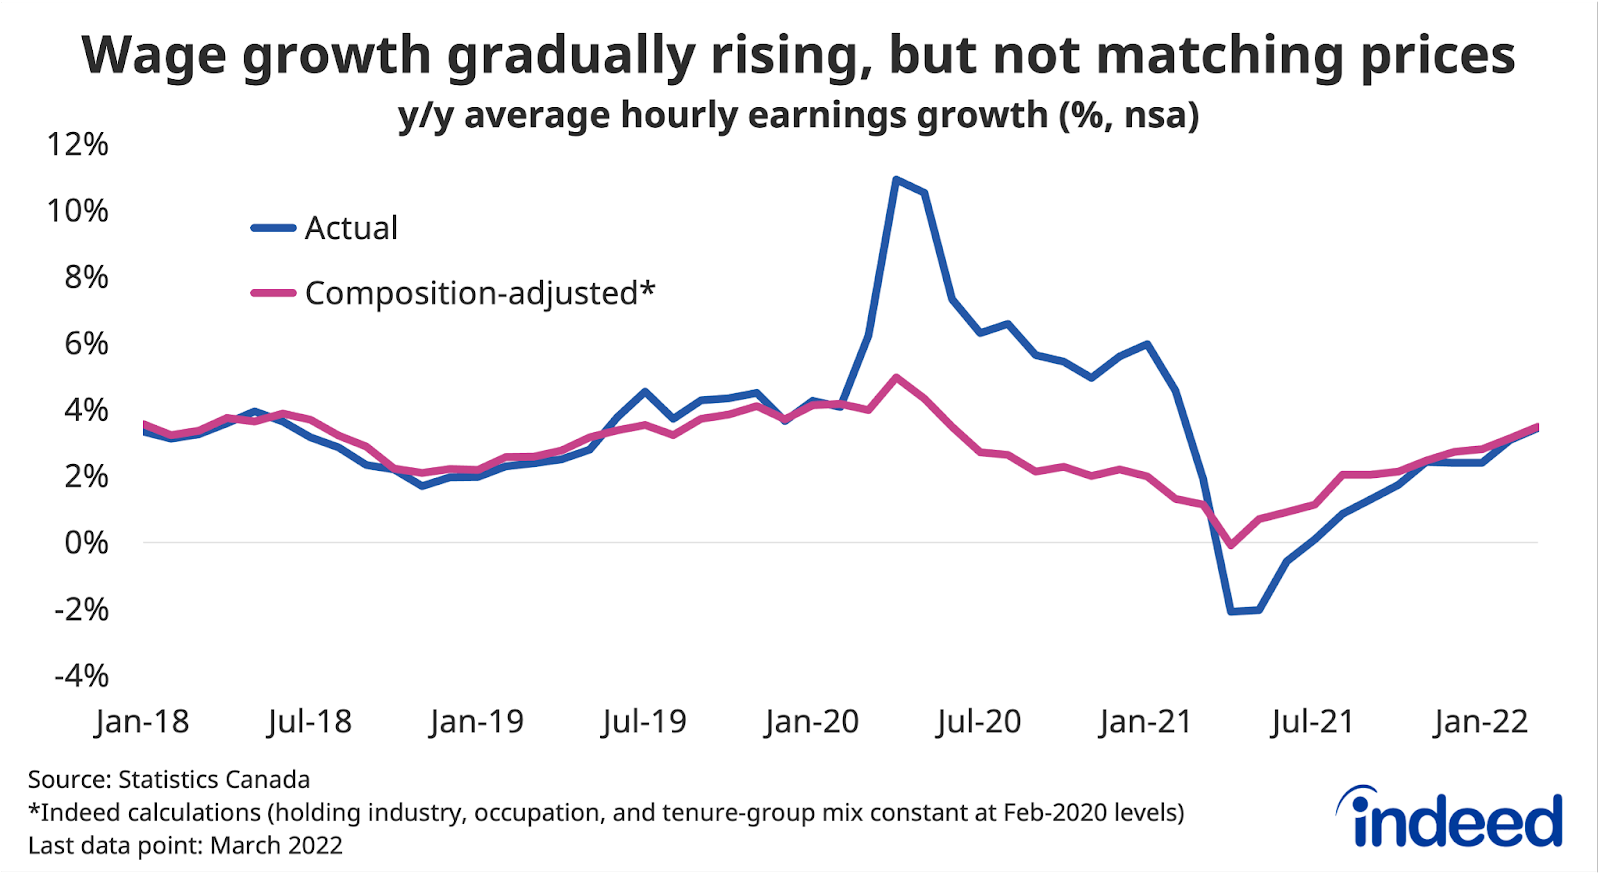 Line graph titled “Wage growth gradually rising, but not matching prices.” With a vertical axis ranging from -4 to 12%, Indeed tracked the percent change in average hourly earnings growth along a vertical axis ranging from January 2018 to January 2022. The two line colours represent “Actual” and “Composition-adjusted.”